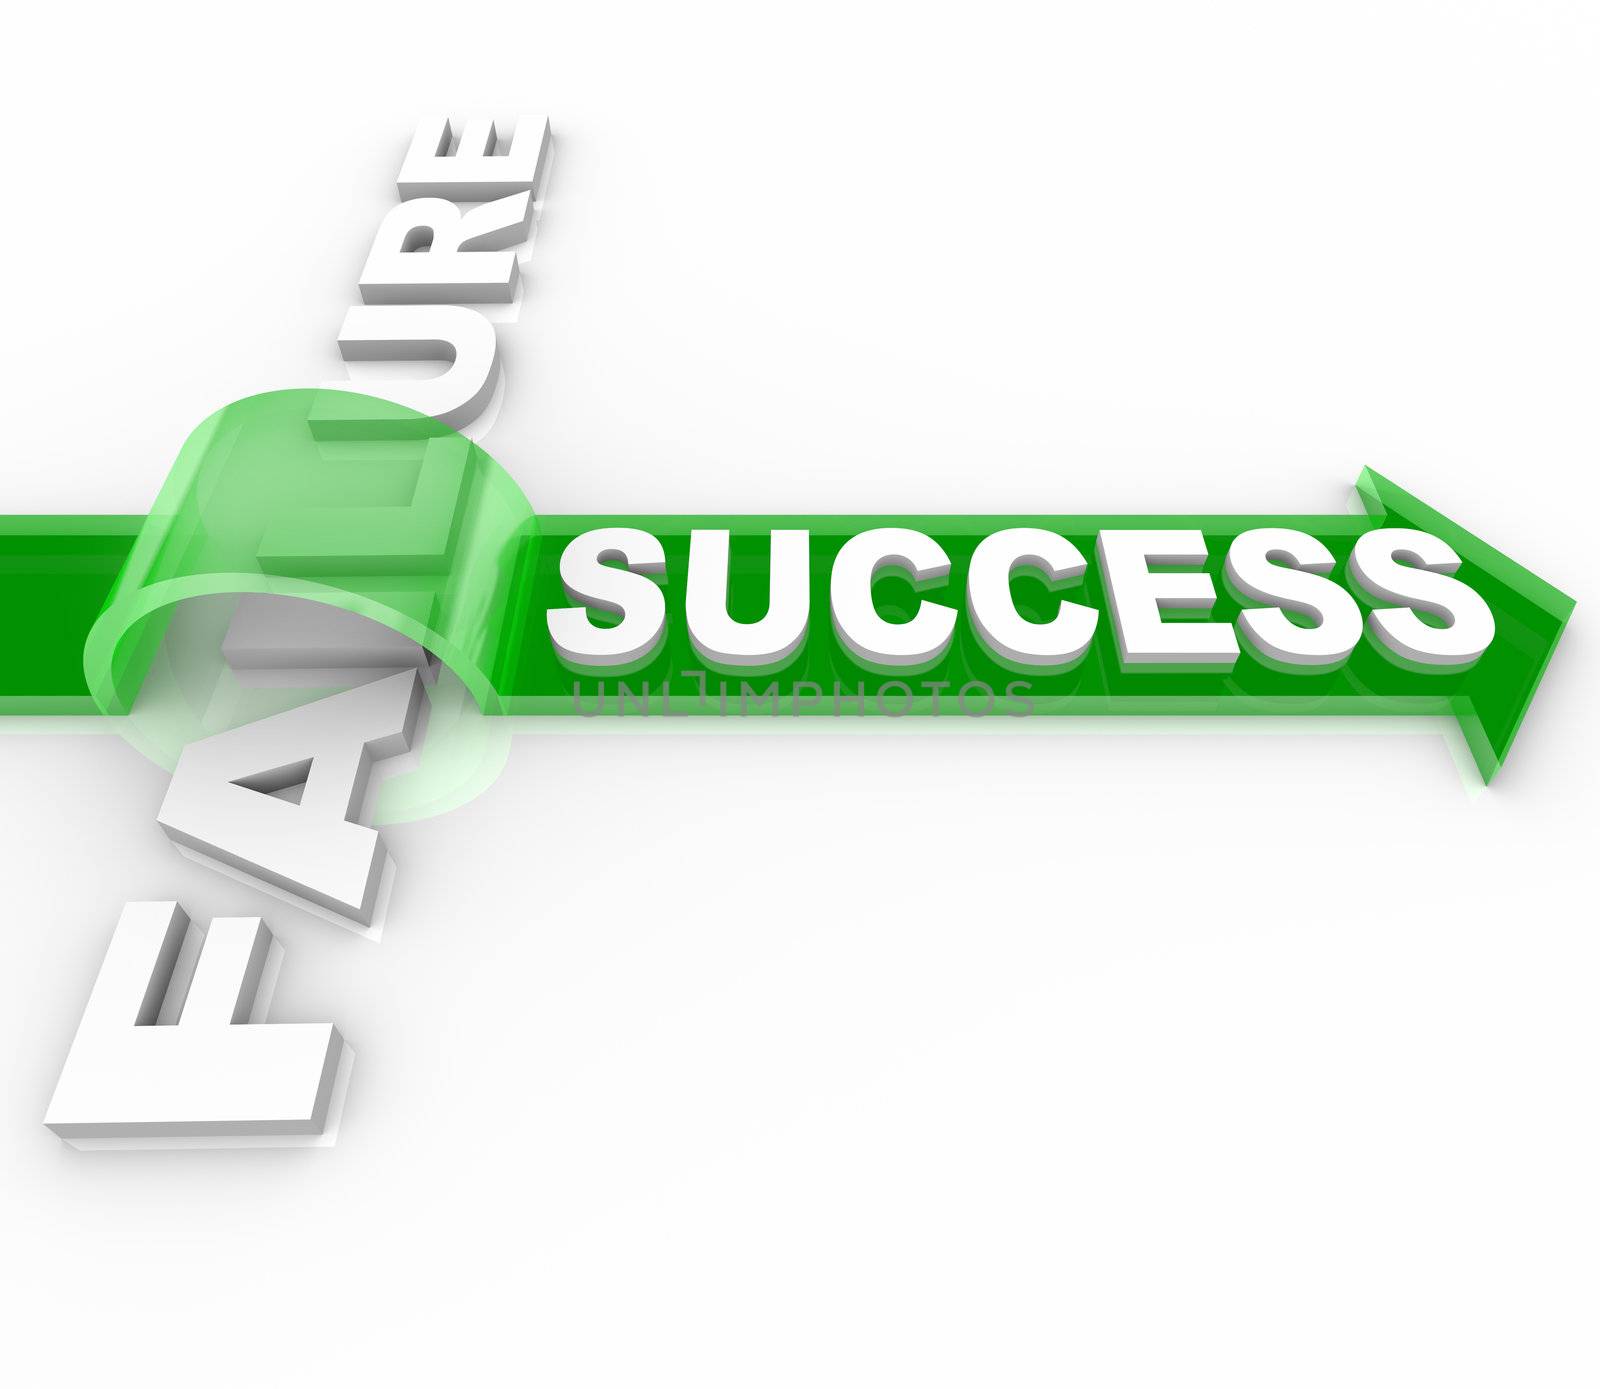 Success Vs Failure - Overcoming an Obstacle to Reach Goal by iQoncept